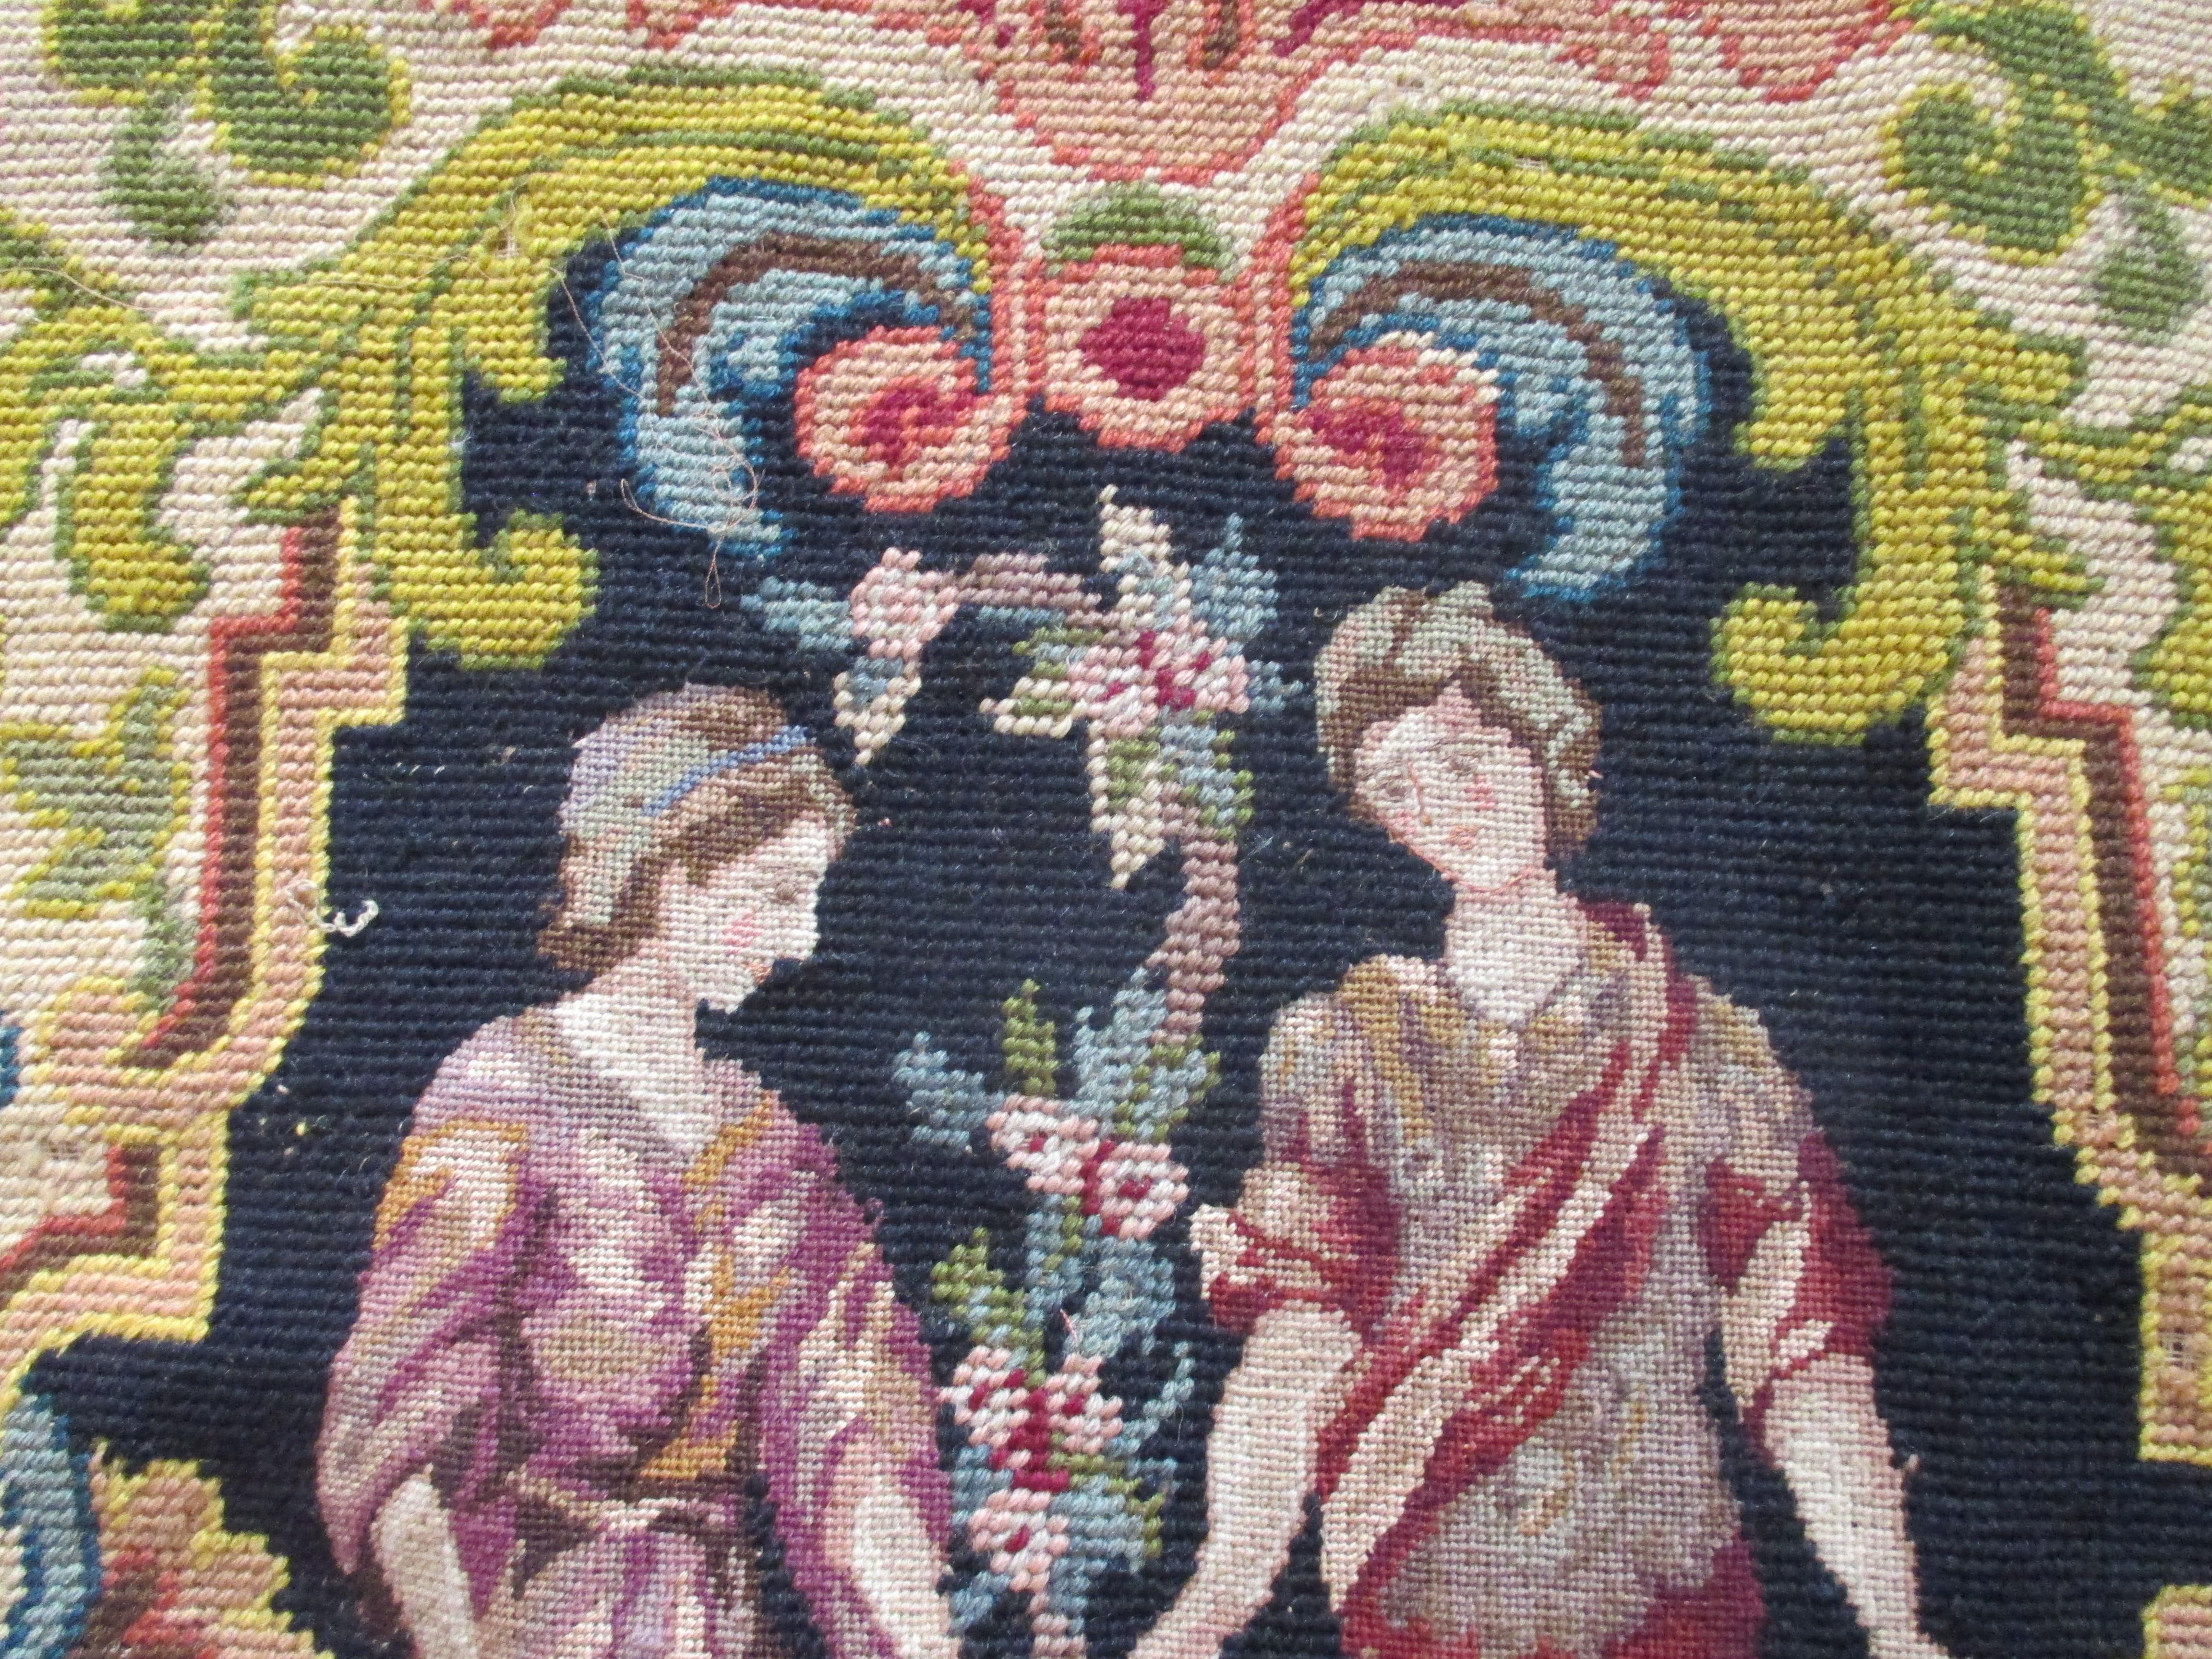 Antique tapestry fragment depicting a garden scene.
A young couple strolling thru the garden.
Ideal for upholstery or a pillow.
In shades of black, gold, brown, yellow, green, red and blue
Size: 25